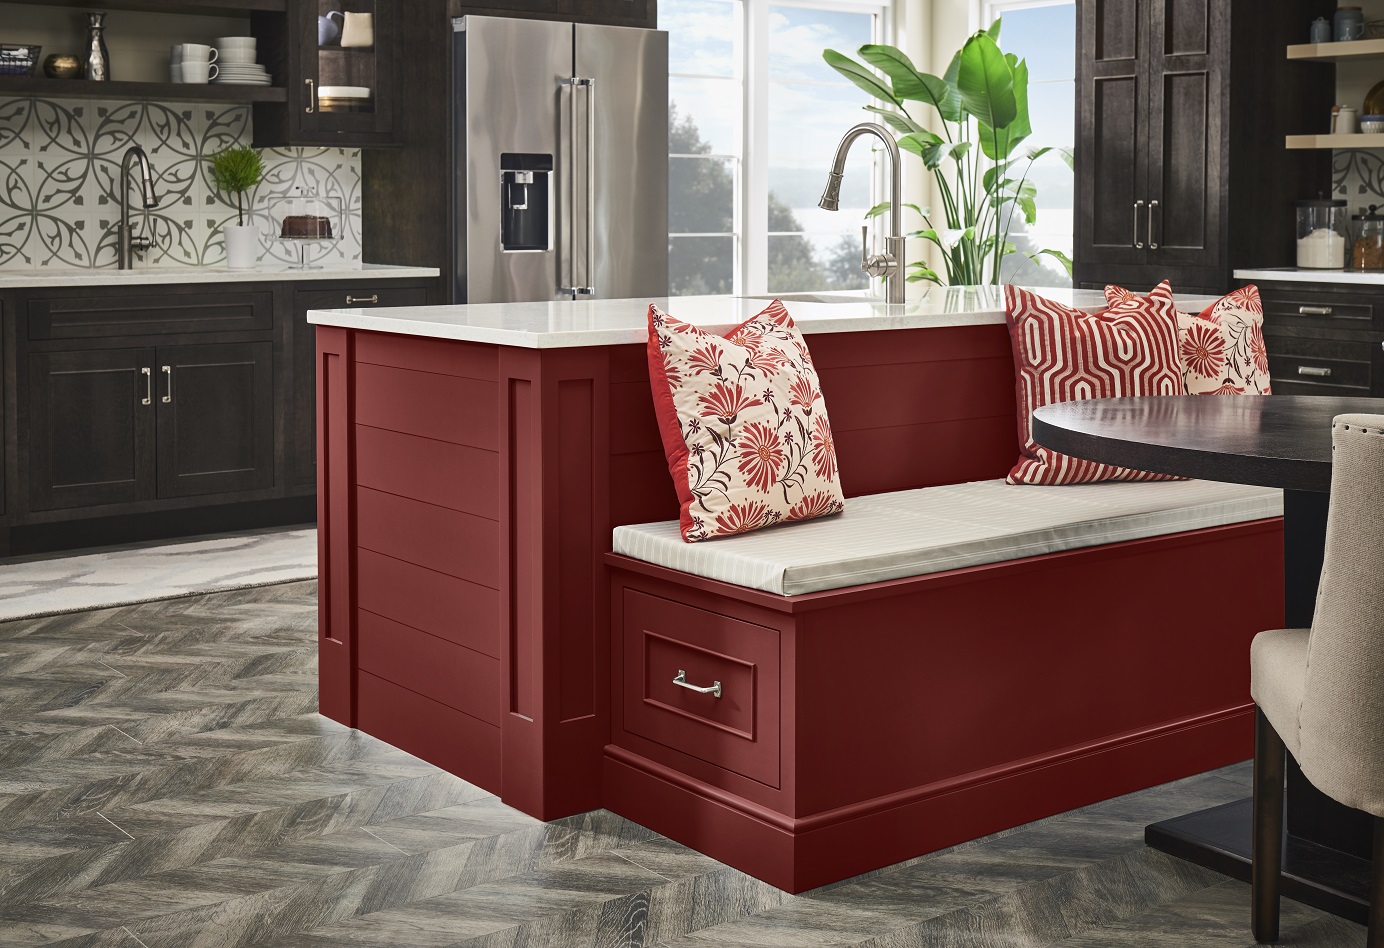 Two-Tone Kitchen Cabinets to Inspire Your Next Redesign - Kitchen & More